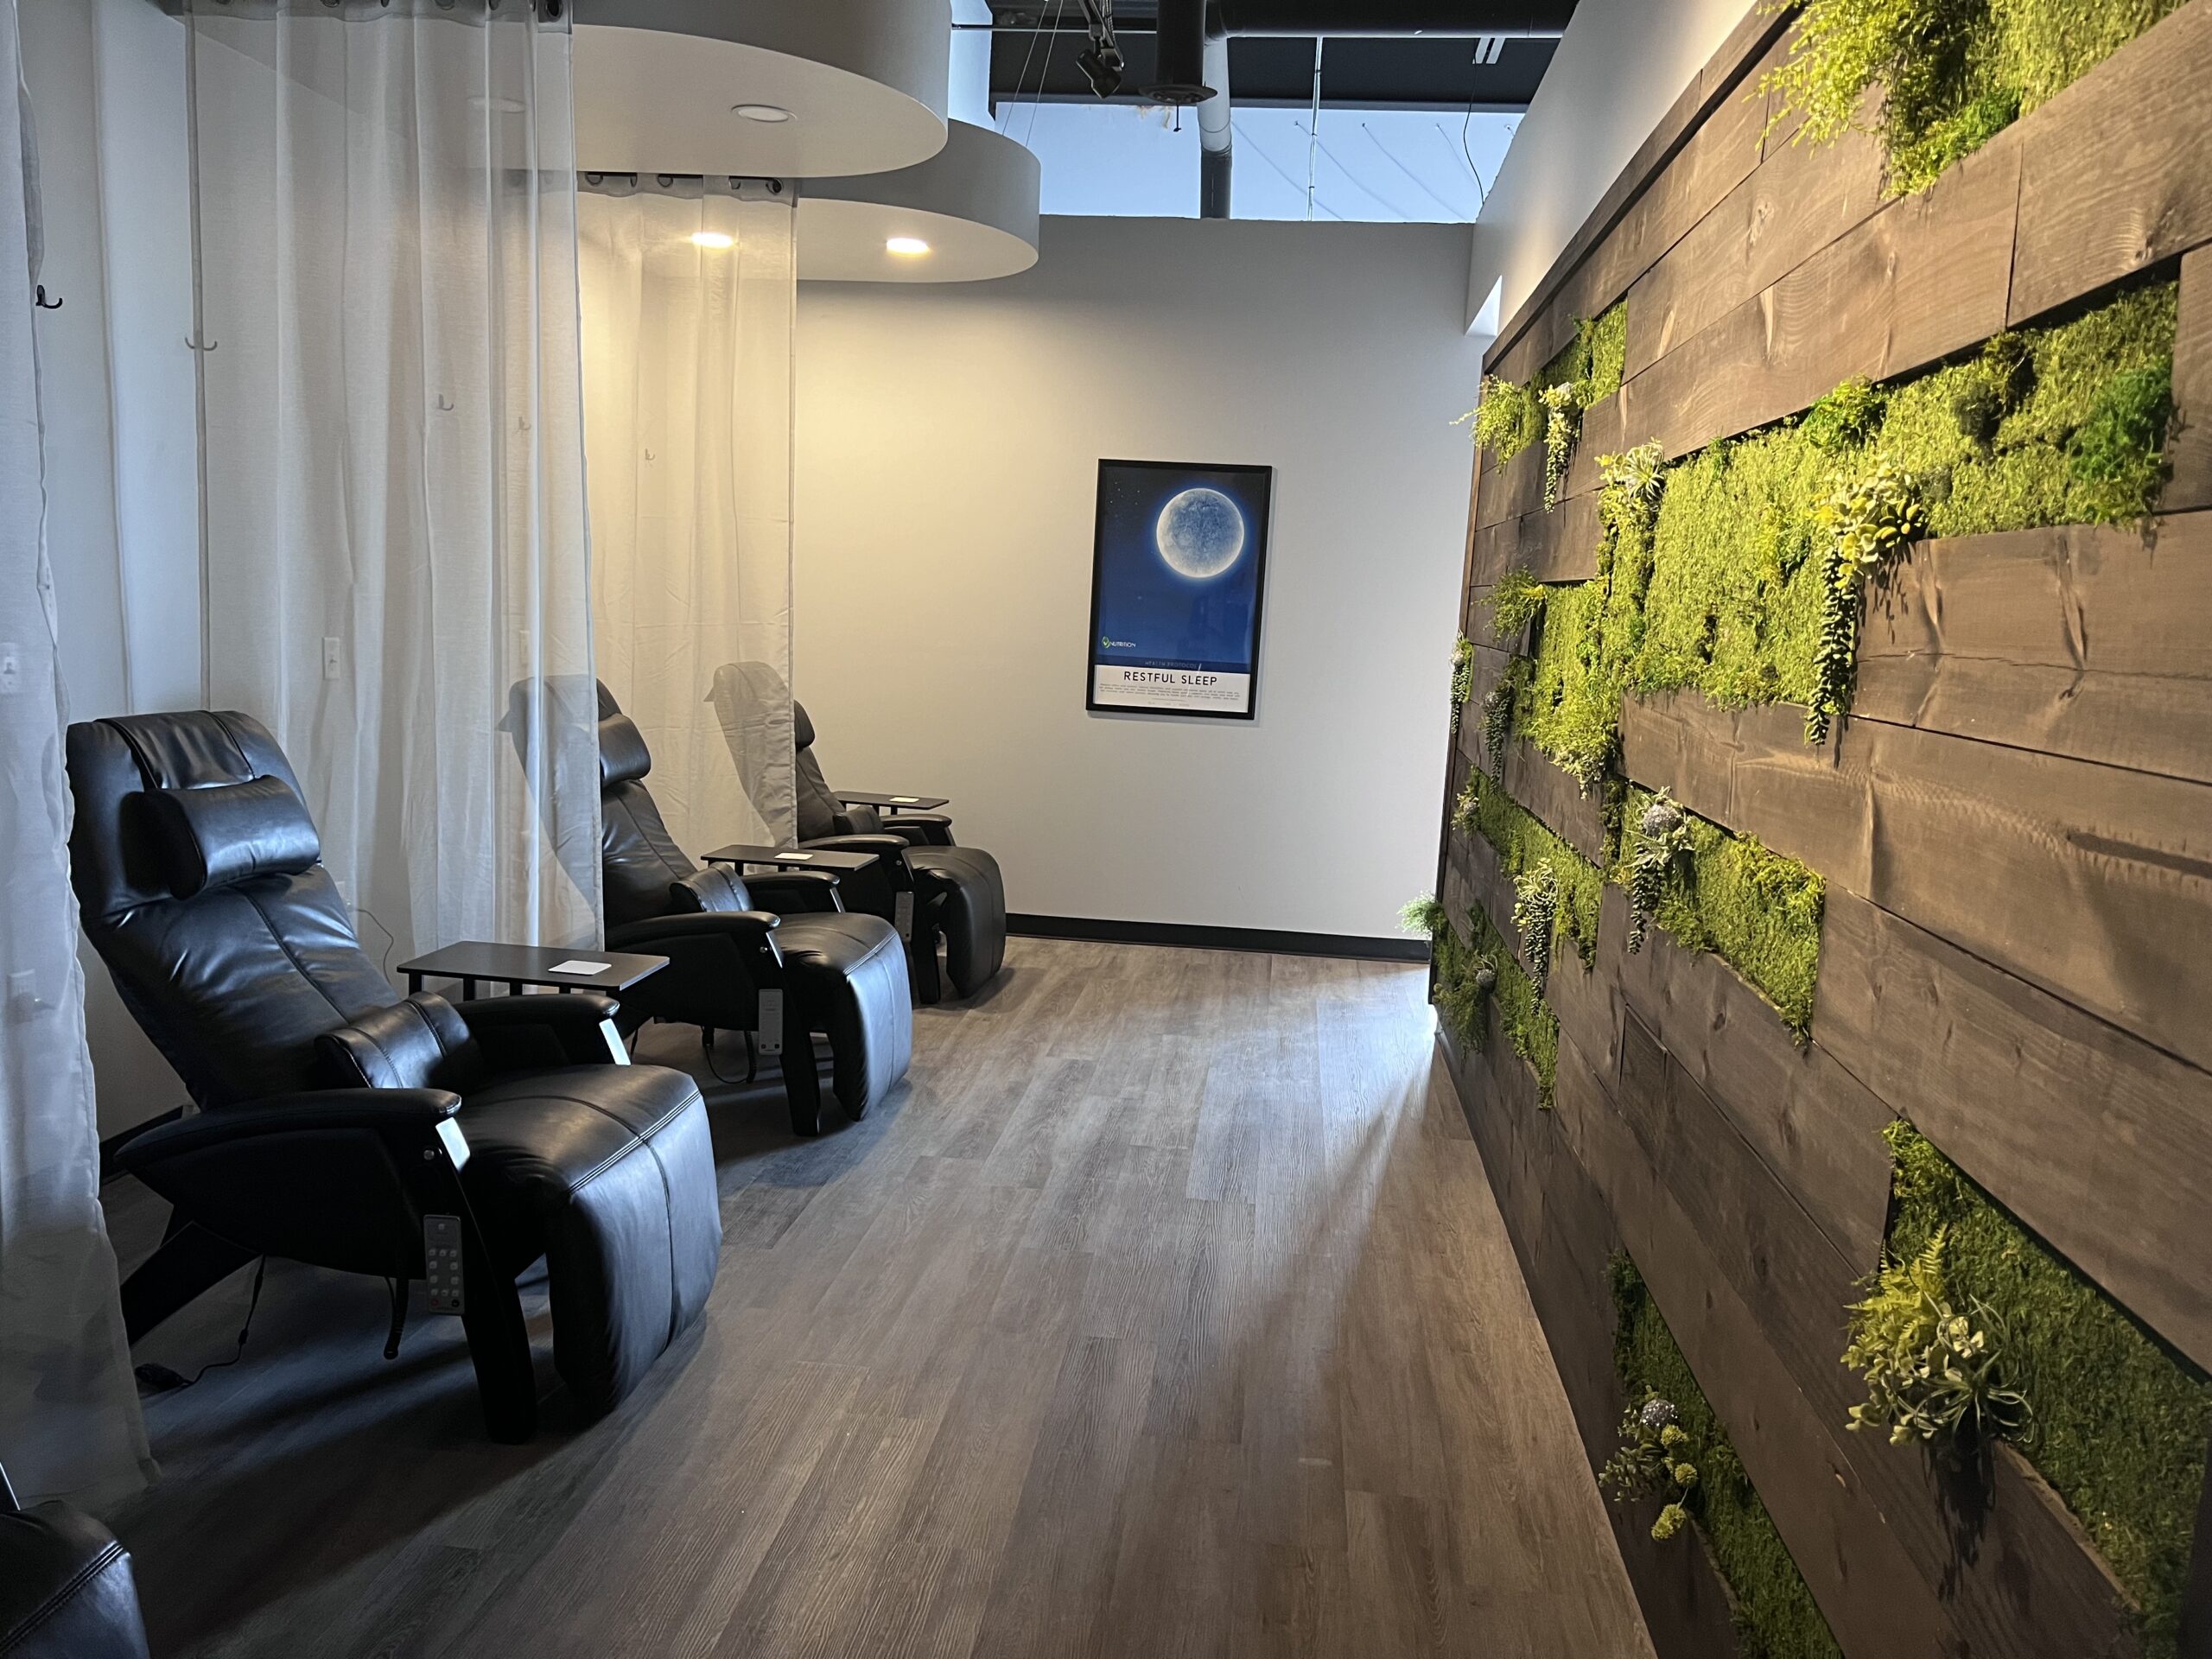 A room with chairs and a wall covered in moss offering nutritional IV therapy.